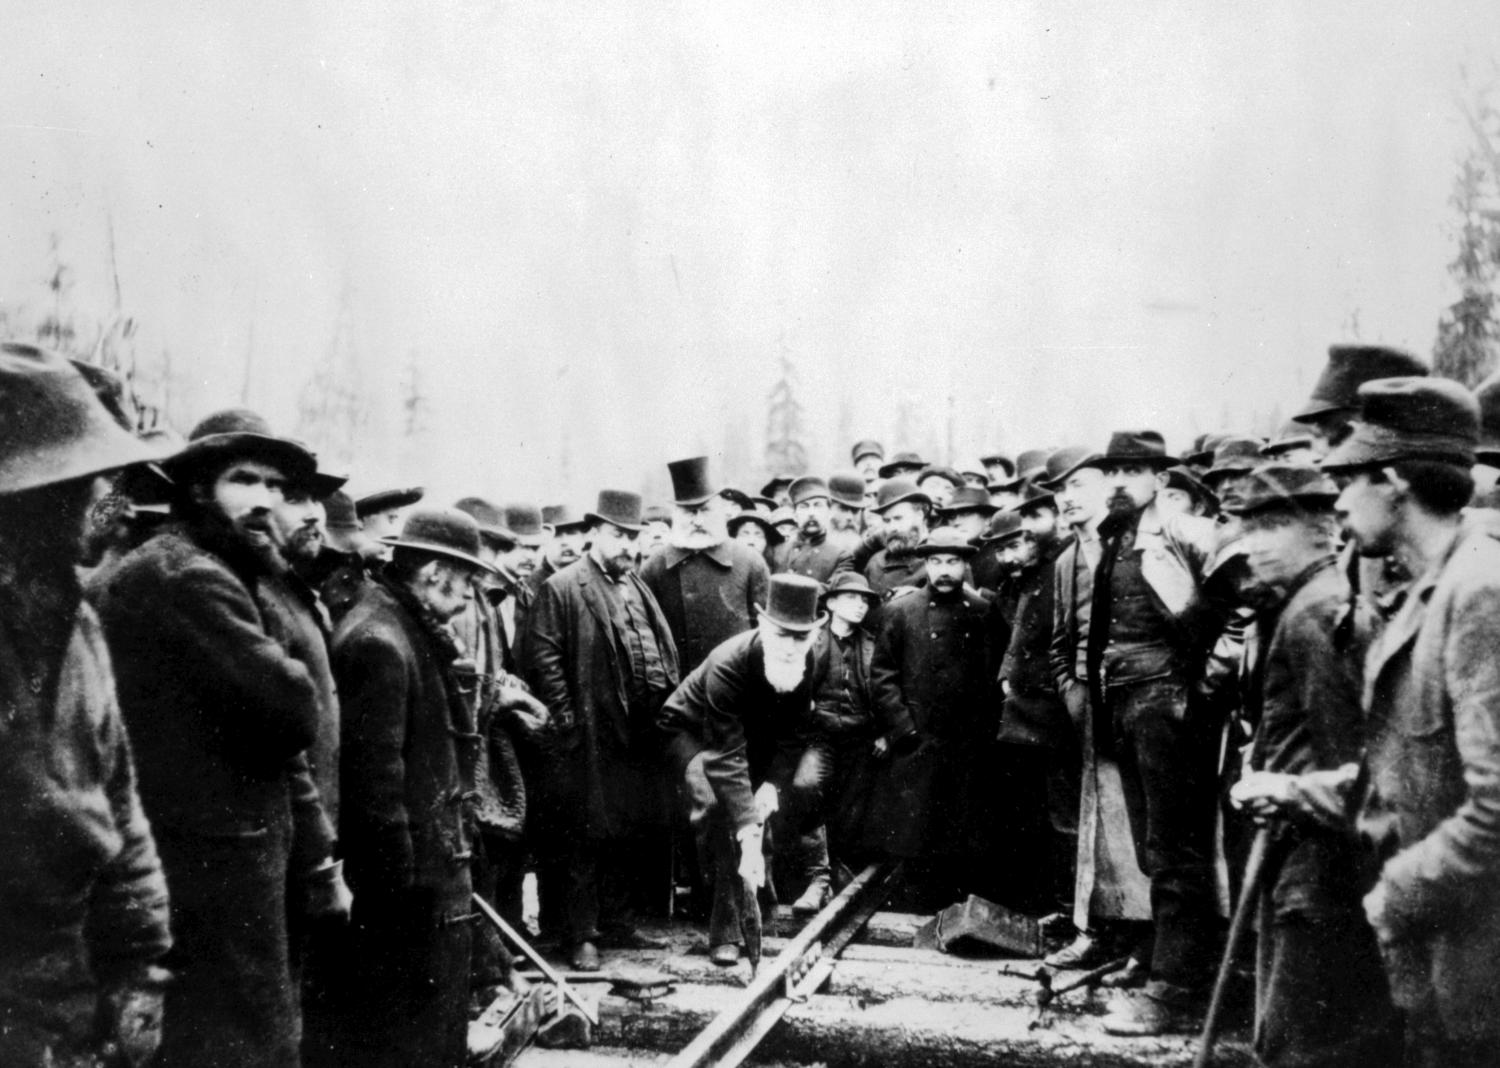 Photo of the last spike and Donald Smith, later Lord Strathcona, being surrounded by workers.